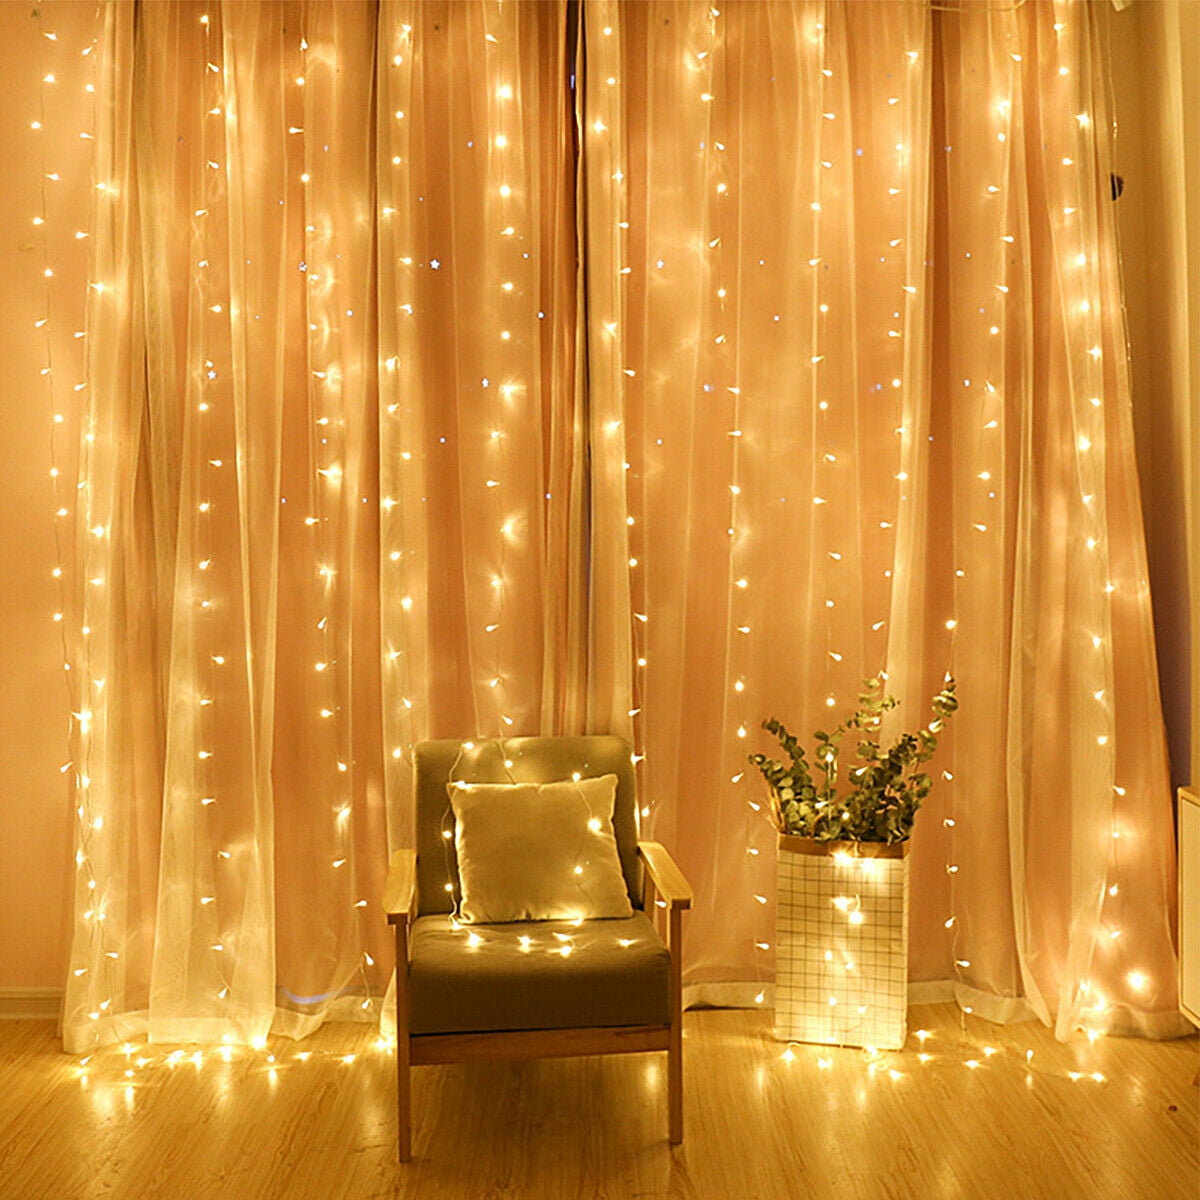 3x3m 300LED Fairy String Light Copper Wire Curtain Lamp 8 Modes Party Decor Gift 